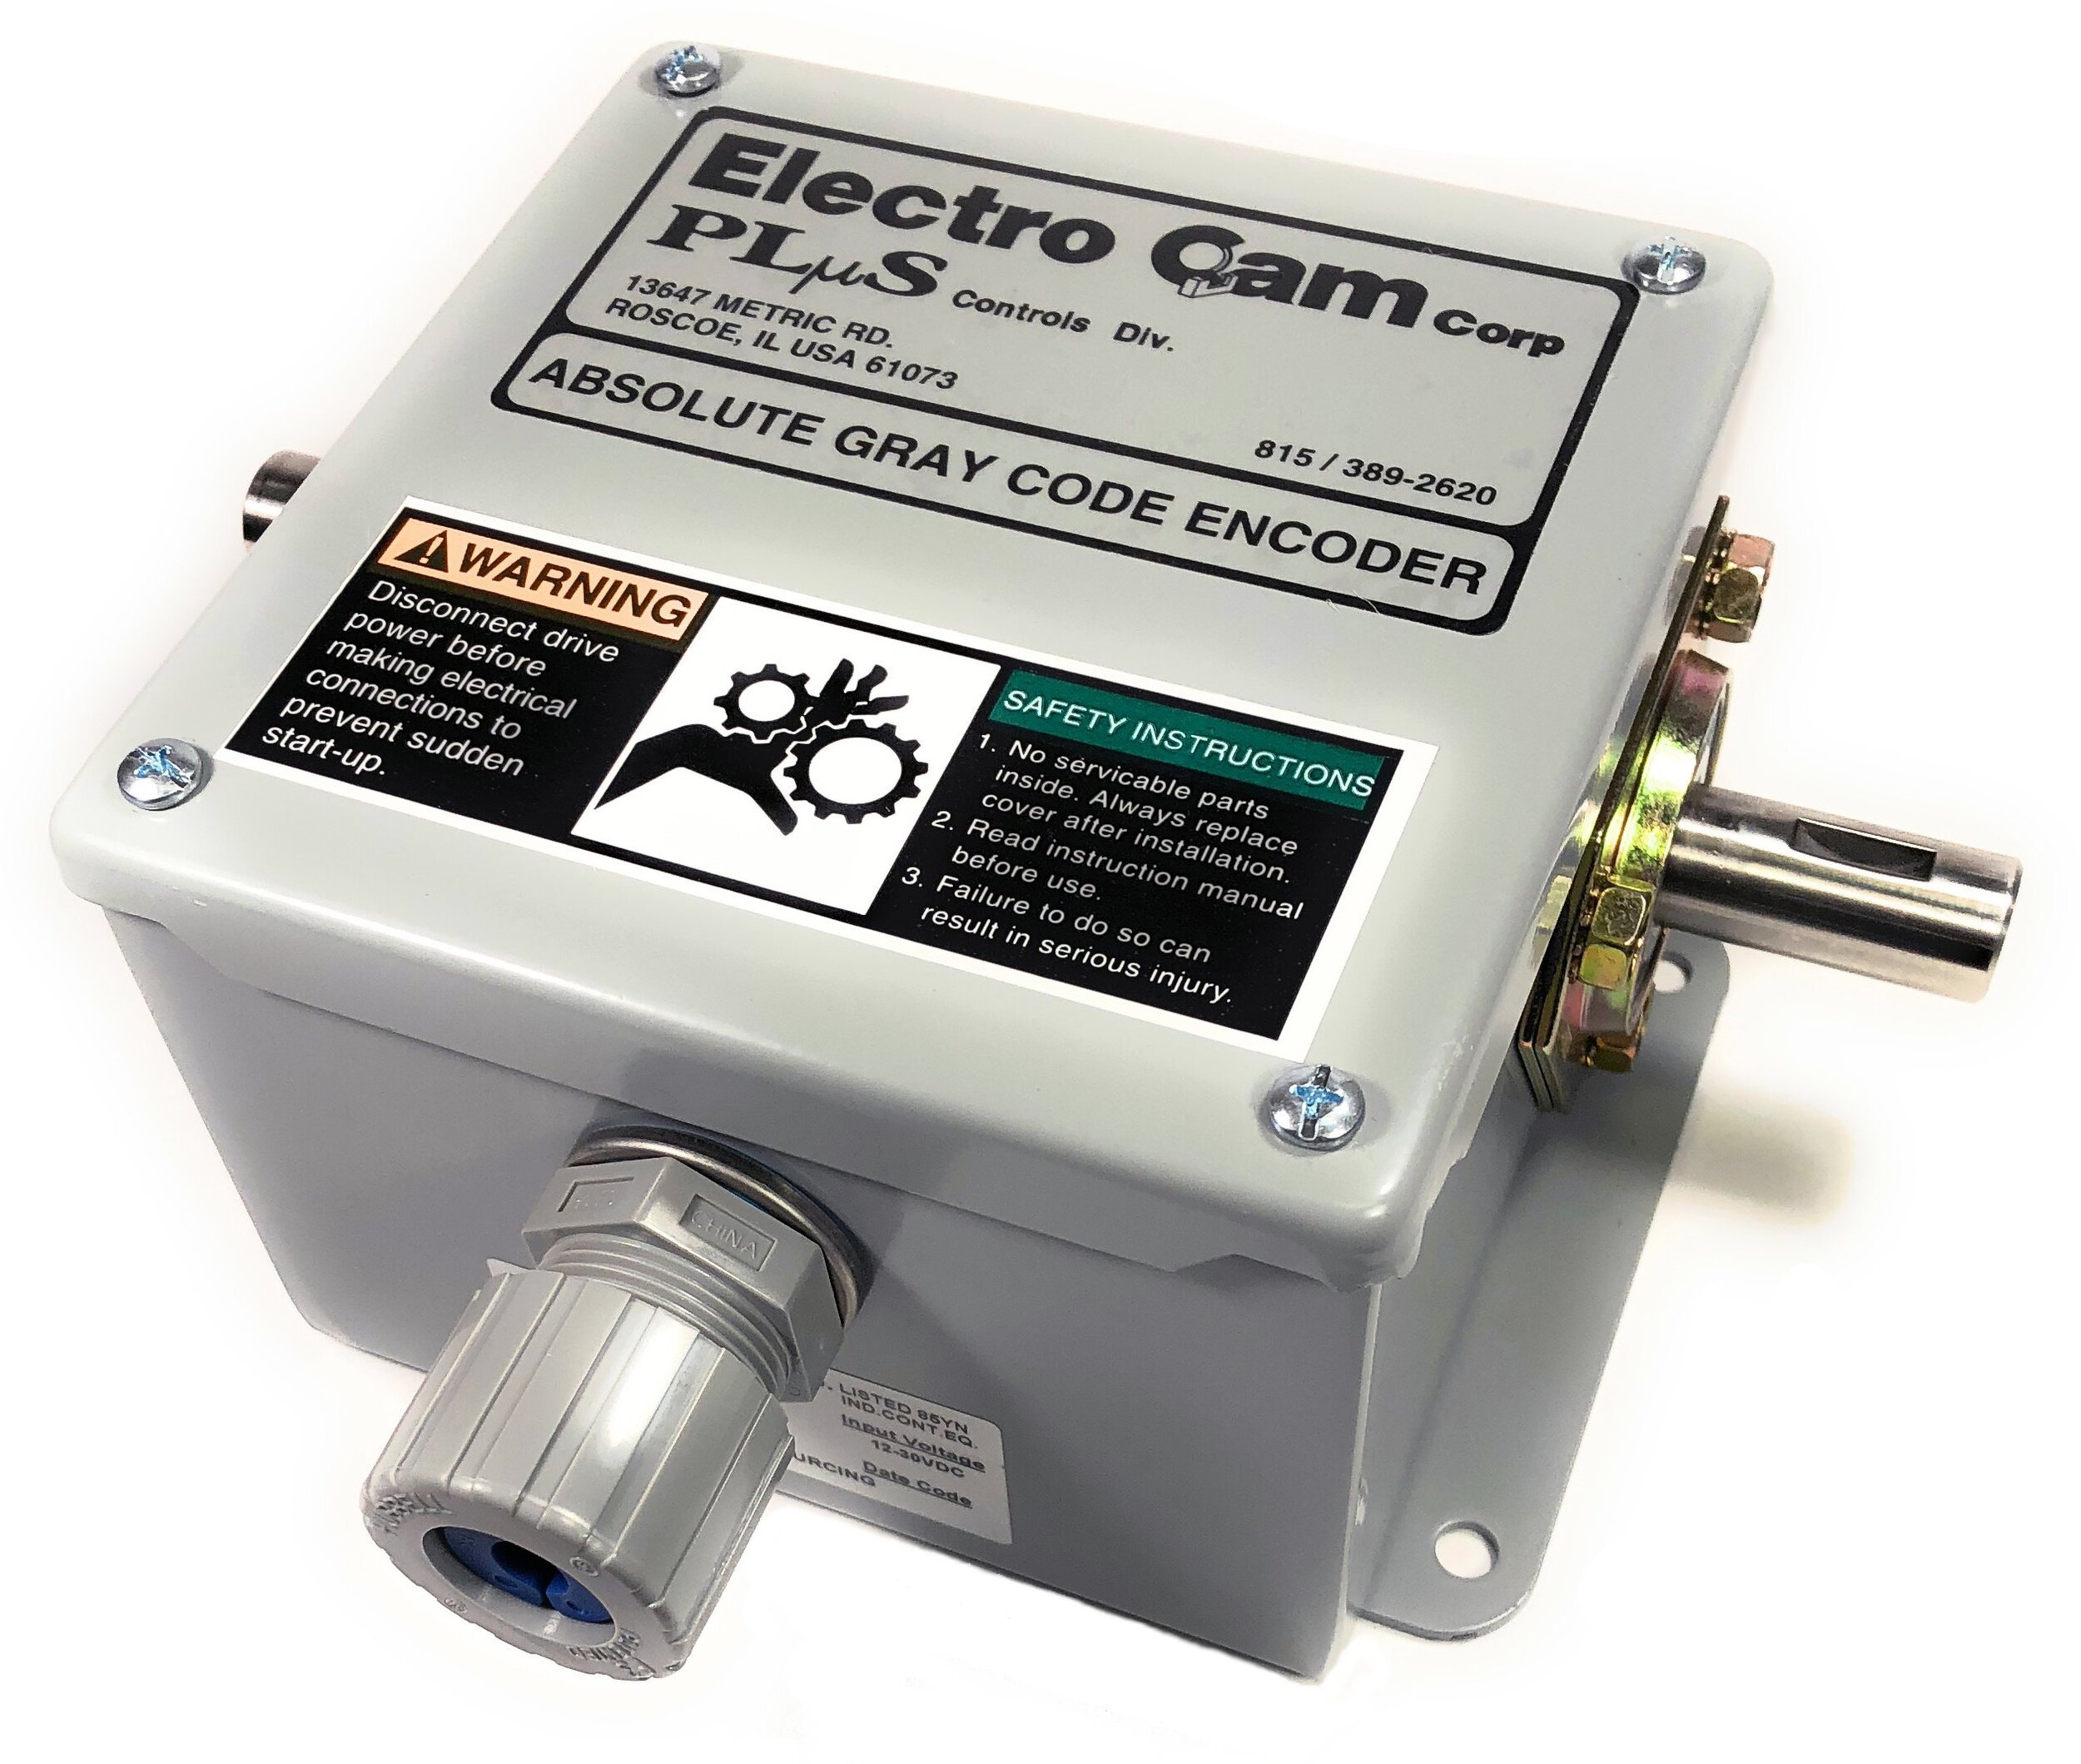 Details about   Electro Cam Plus 5000 Series Programmable Limit Switch PS-5004-10-016 115V 